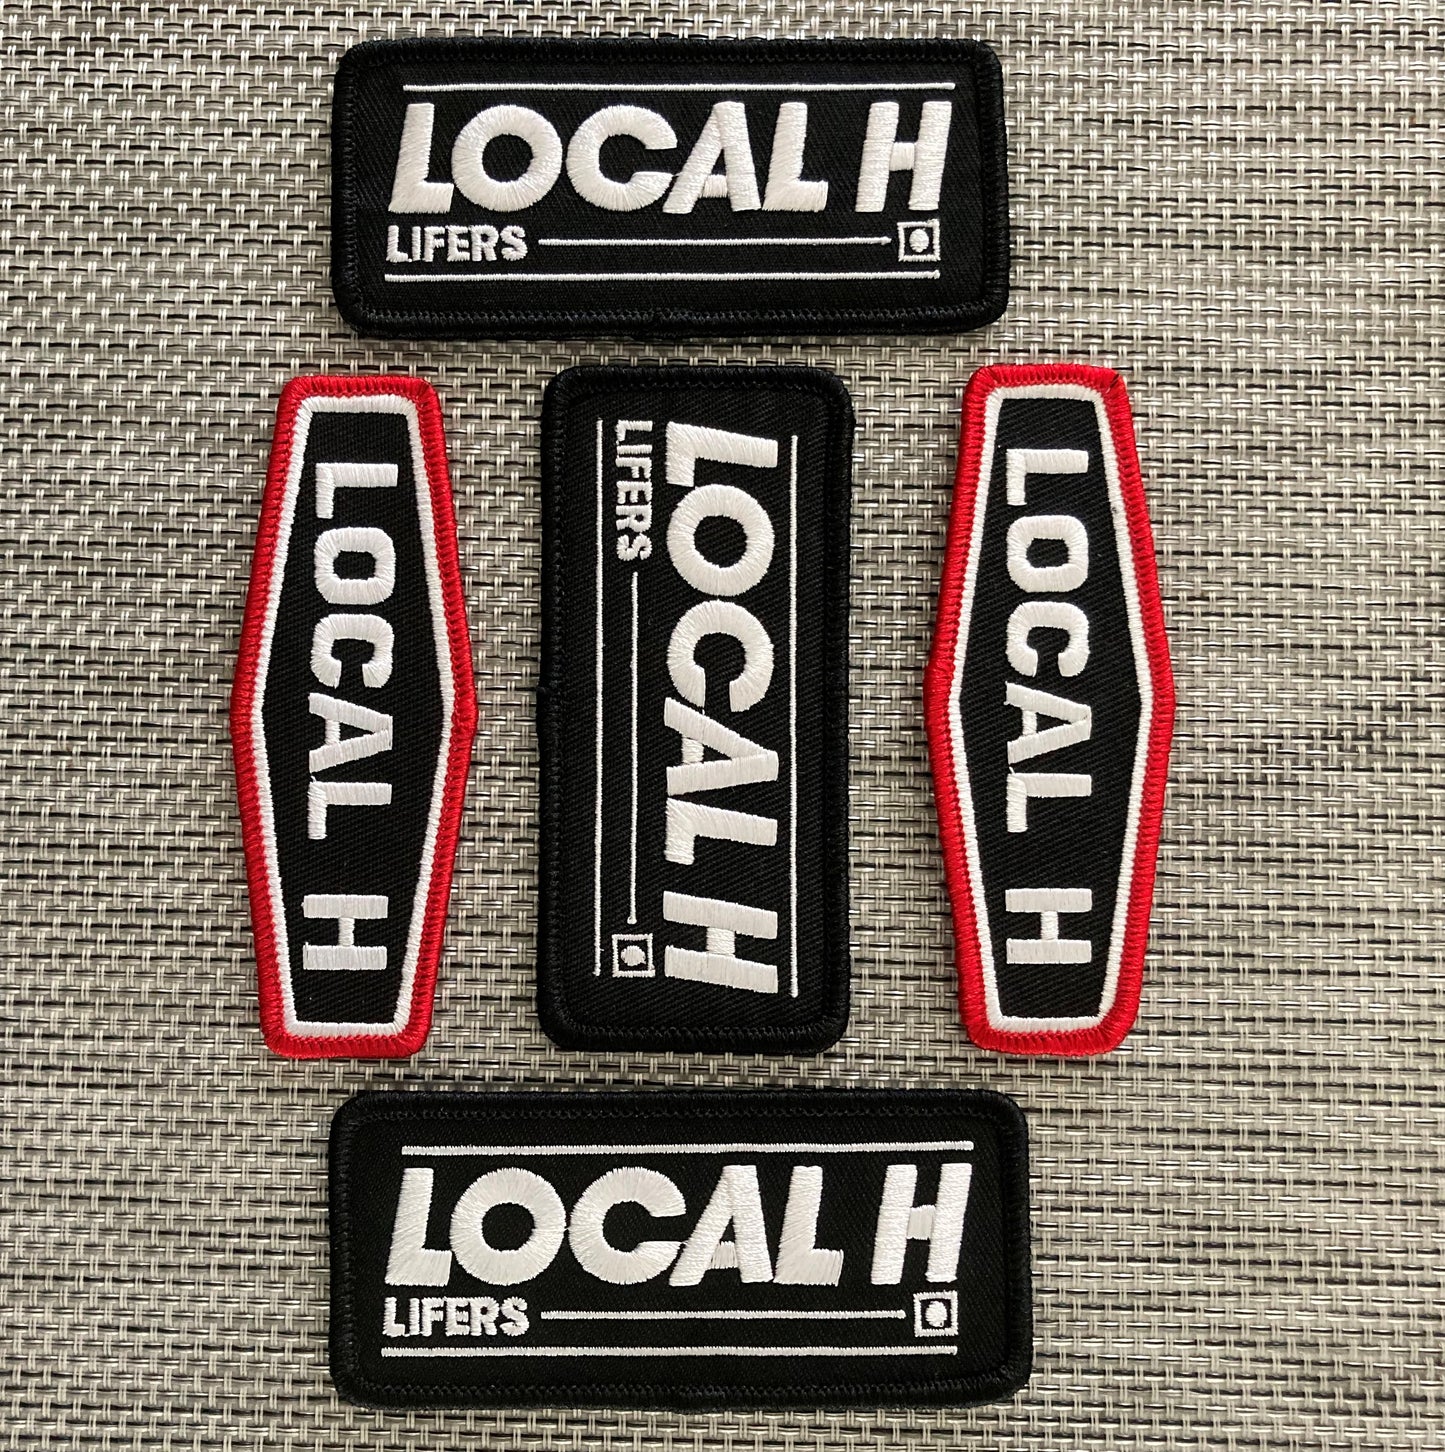 Local H - Patches